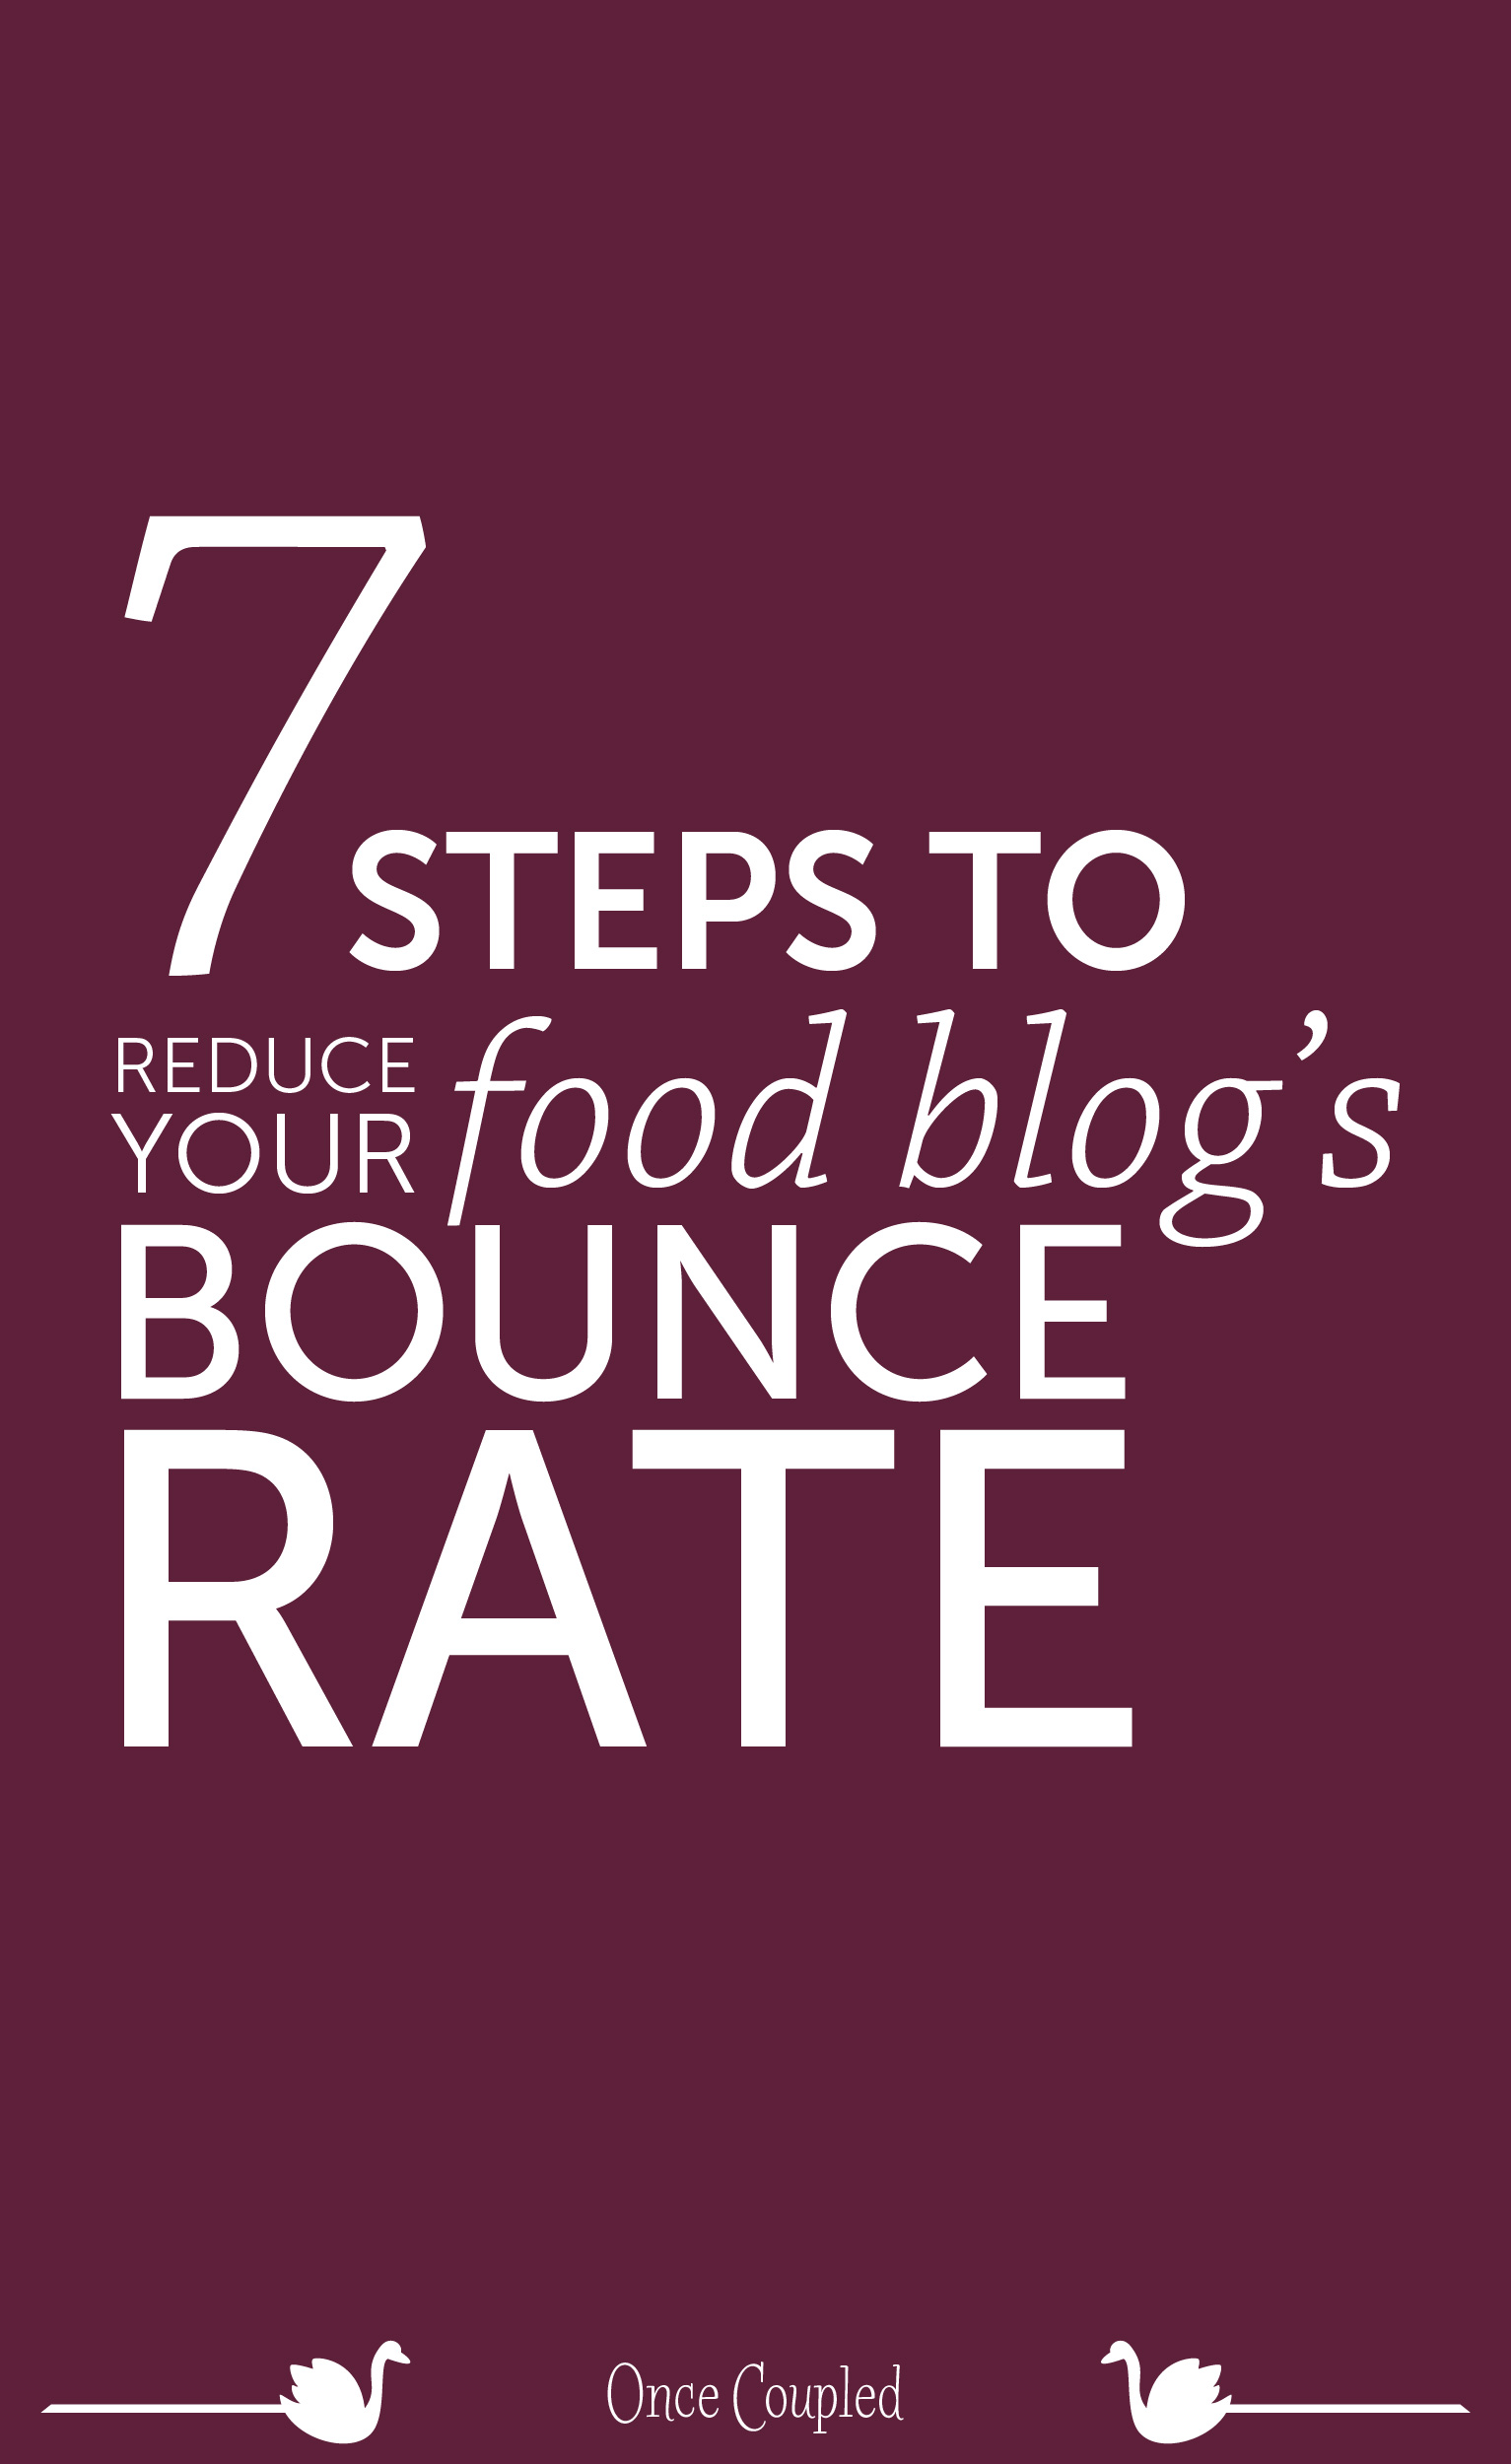 7 Steps to Reduce Your Food Blog's Bounce Rate